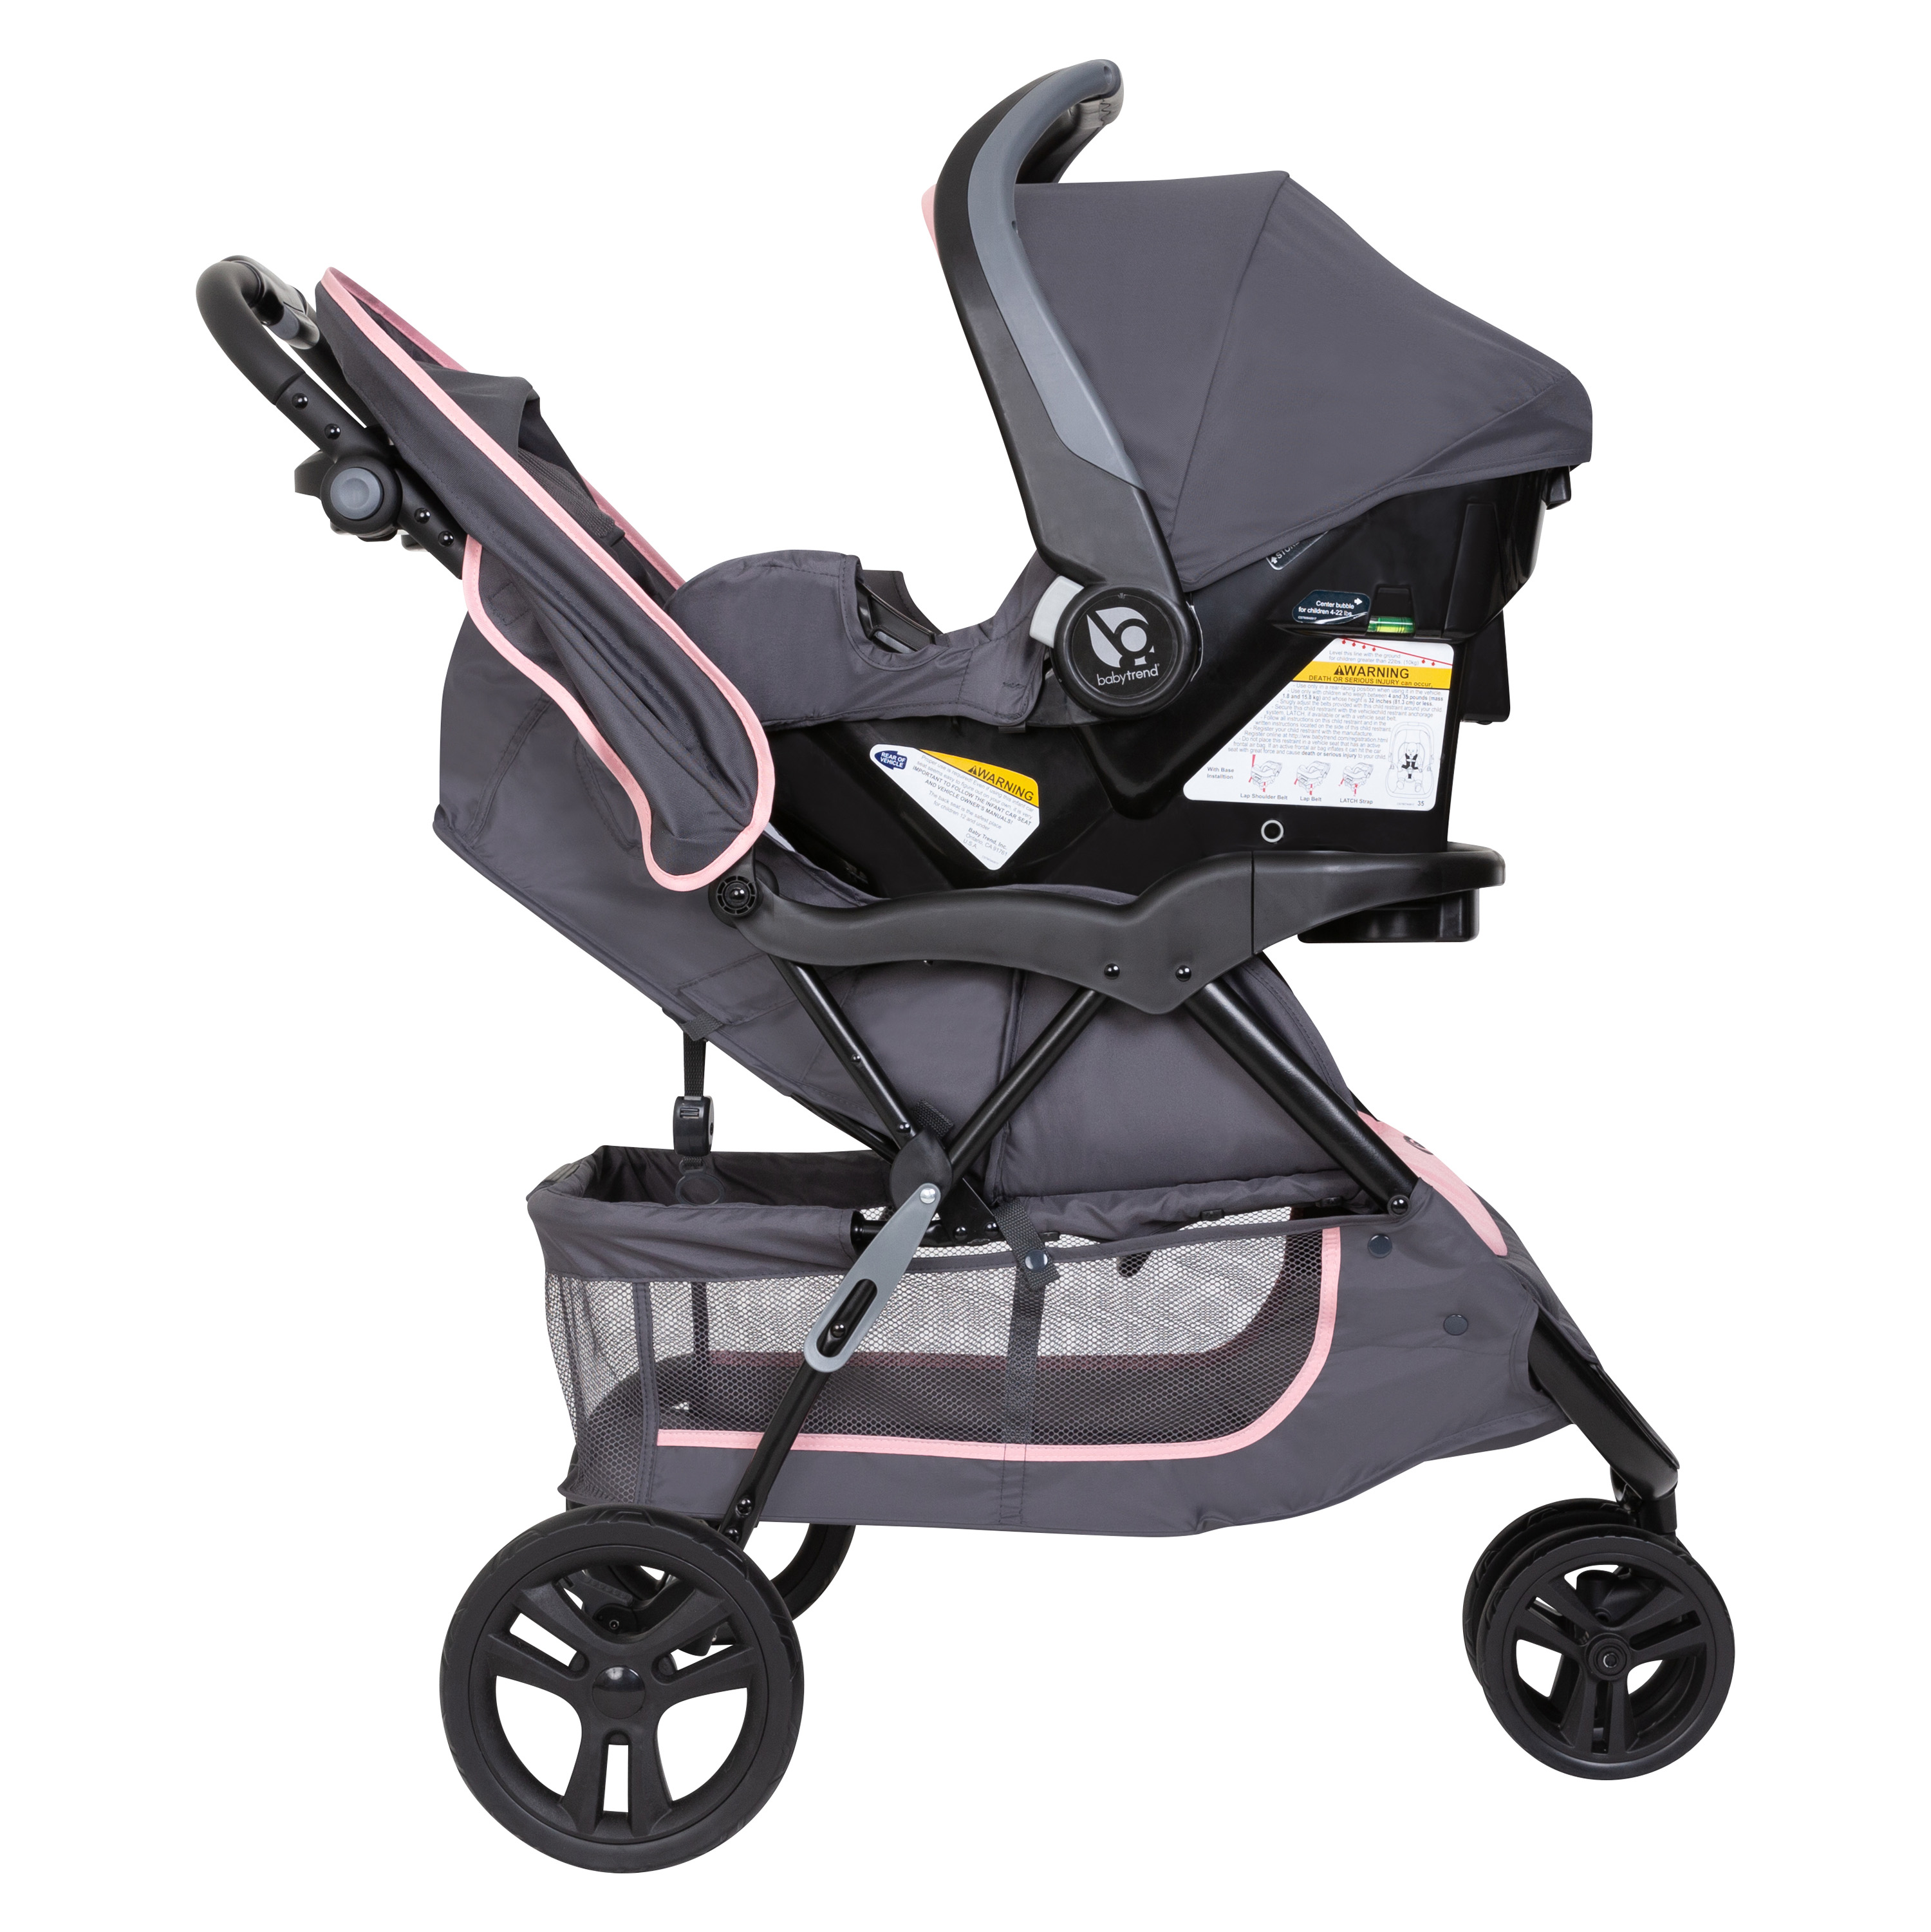 Baby Trend EZ Ride Travel System Stroller, Two Toned Flamingo Pink - image 5 of 12